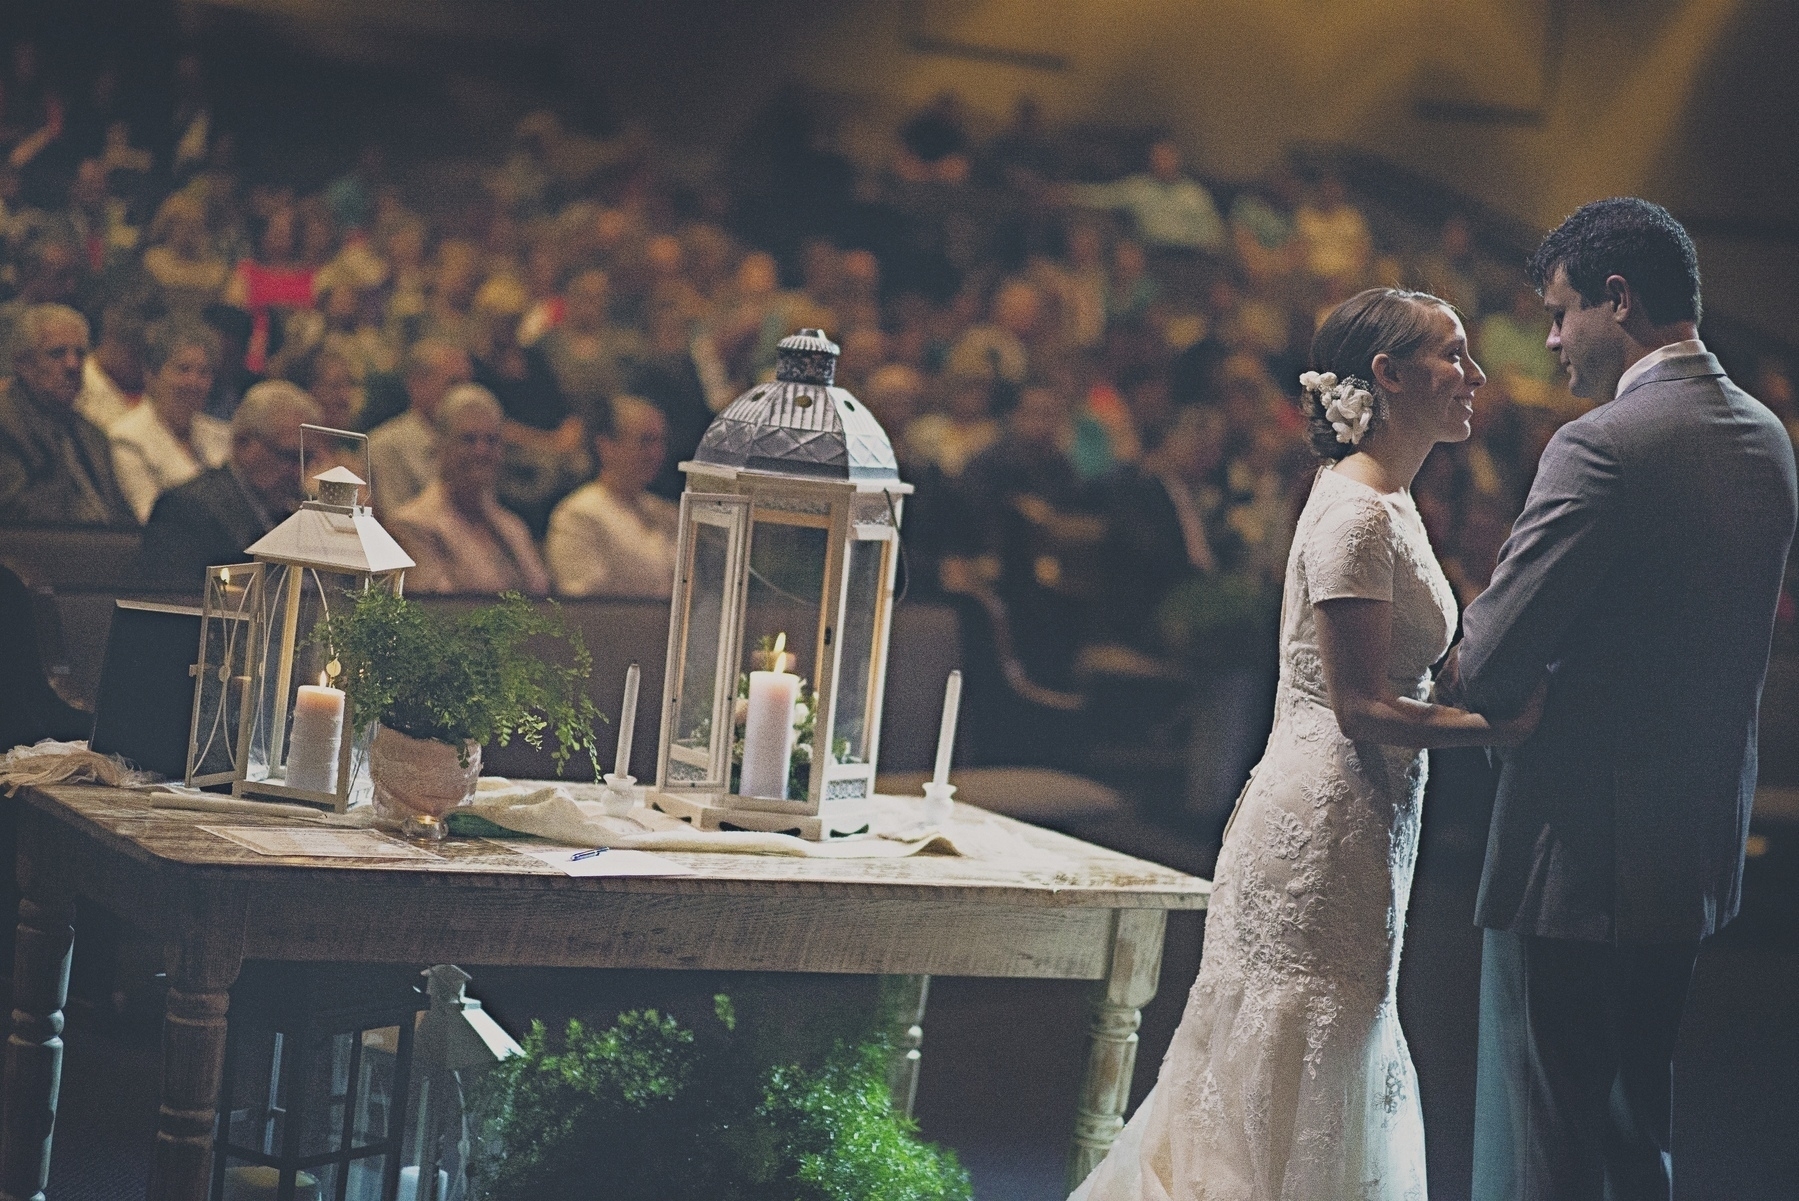 A couple is standing in front of a beautifully decorated table with lanterns and candles, holding hands and gazing at each other, while an audience watches.